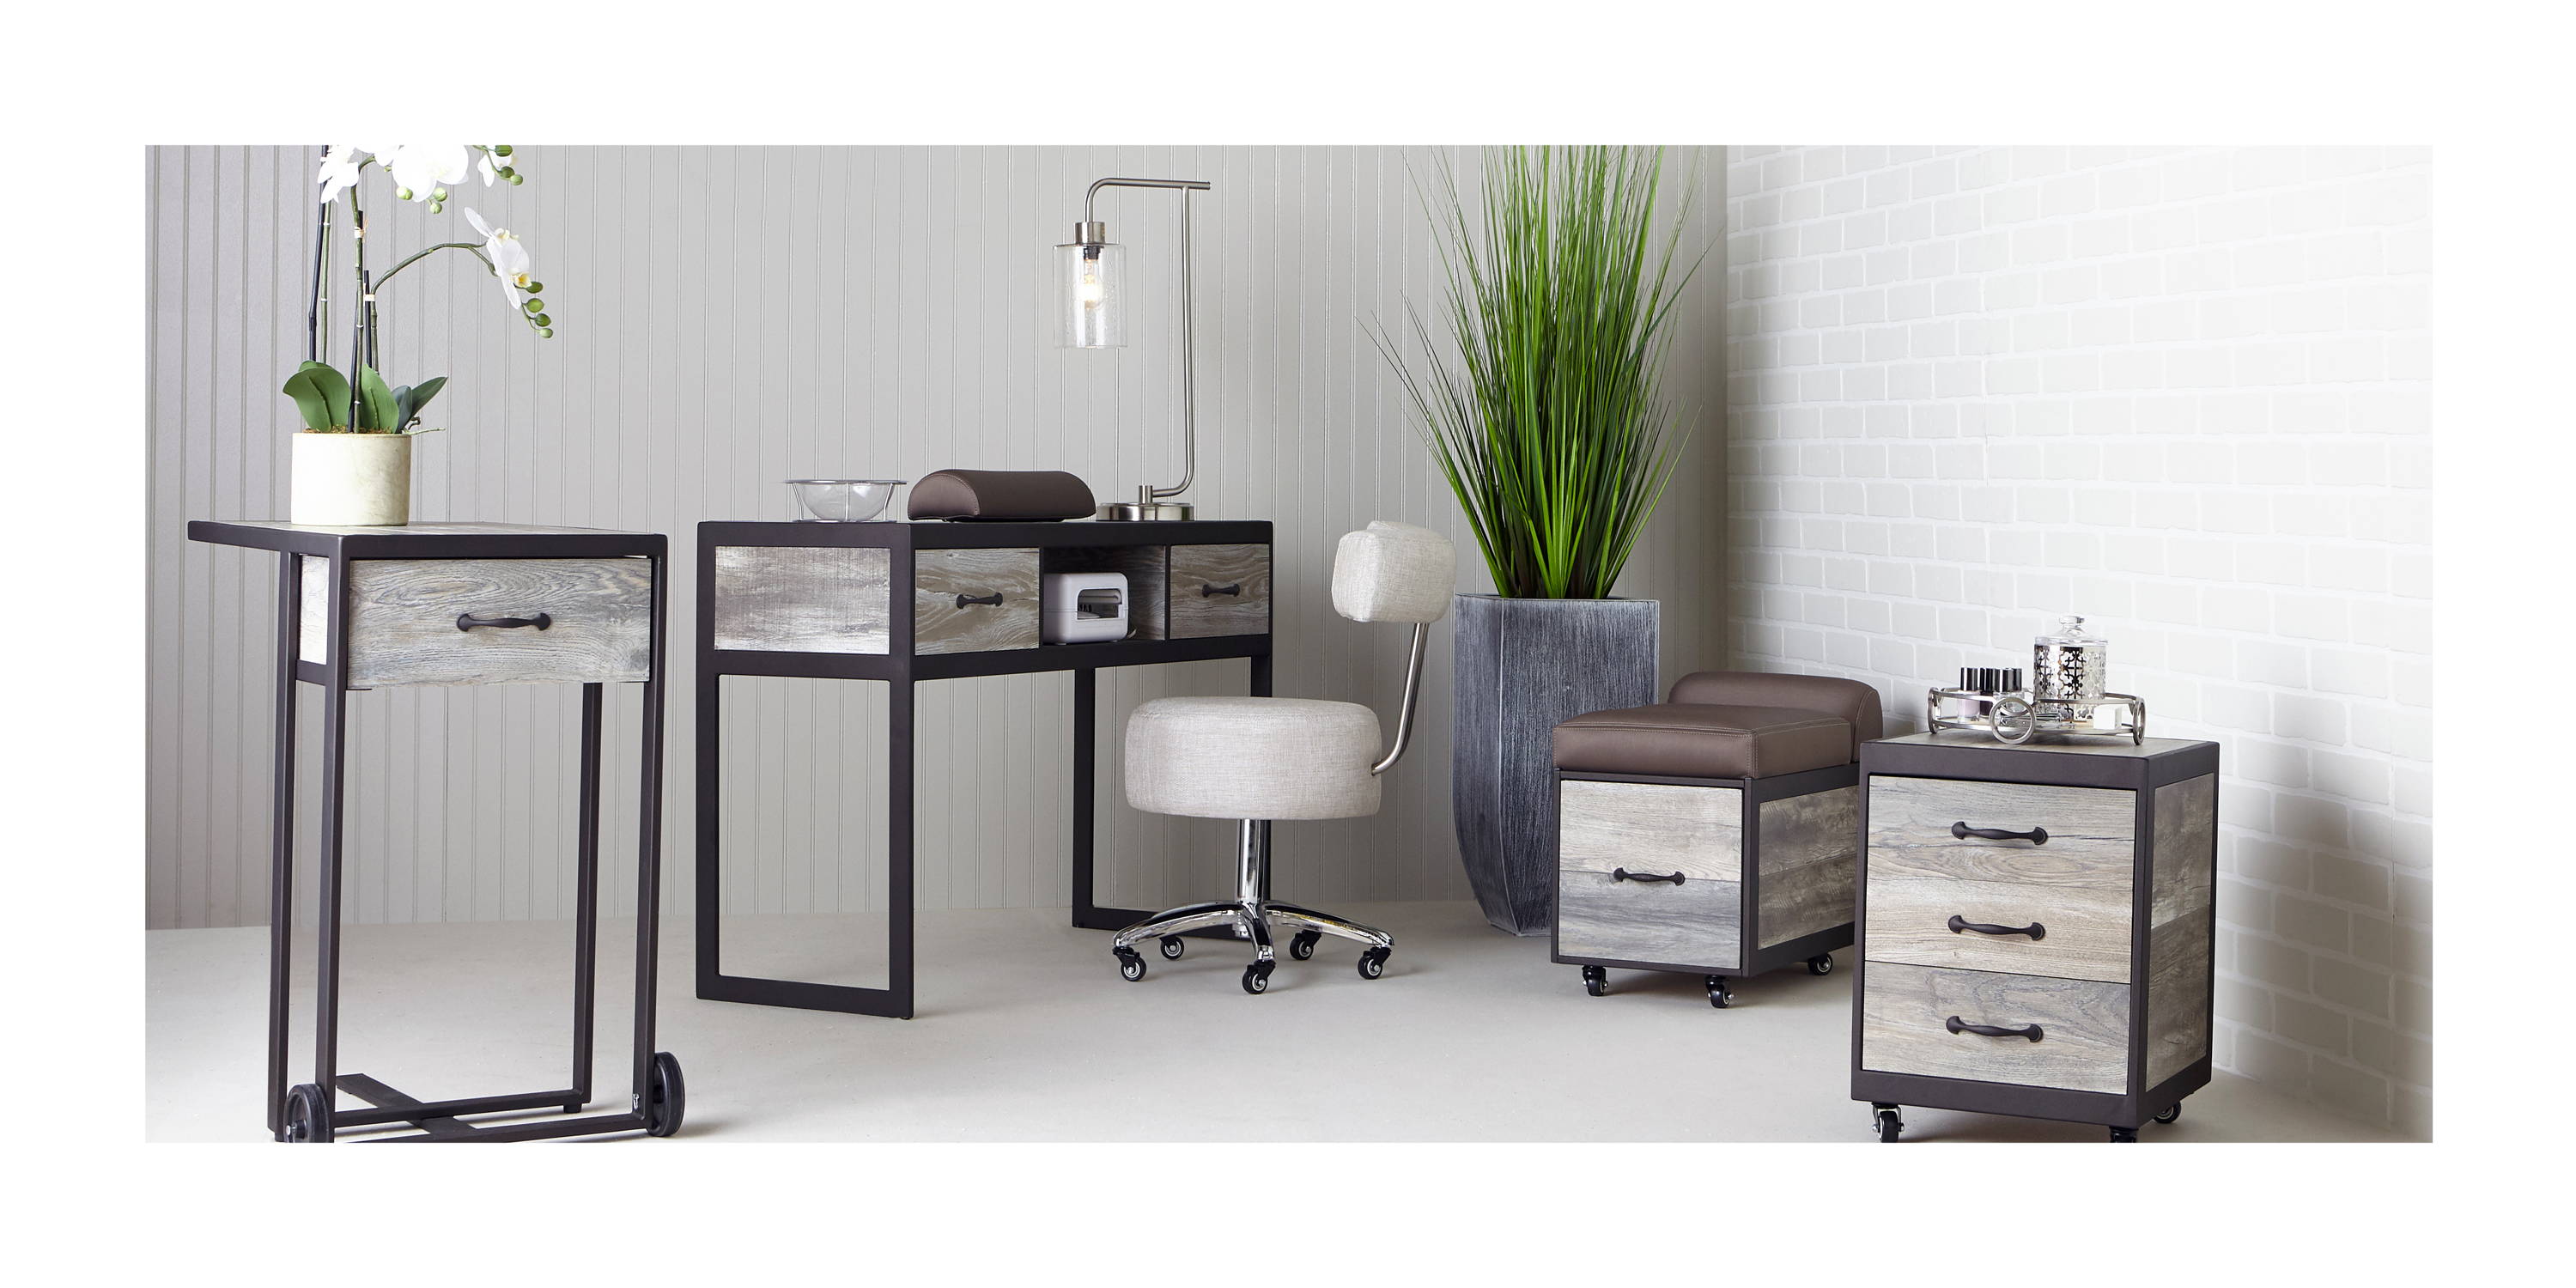 Elora Salon and Spa Furniture Collection by Belava